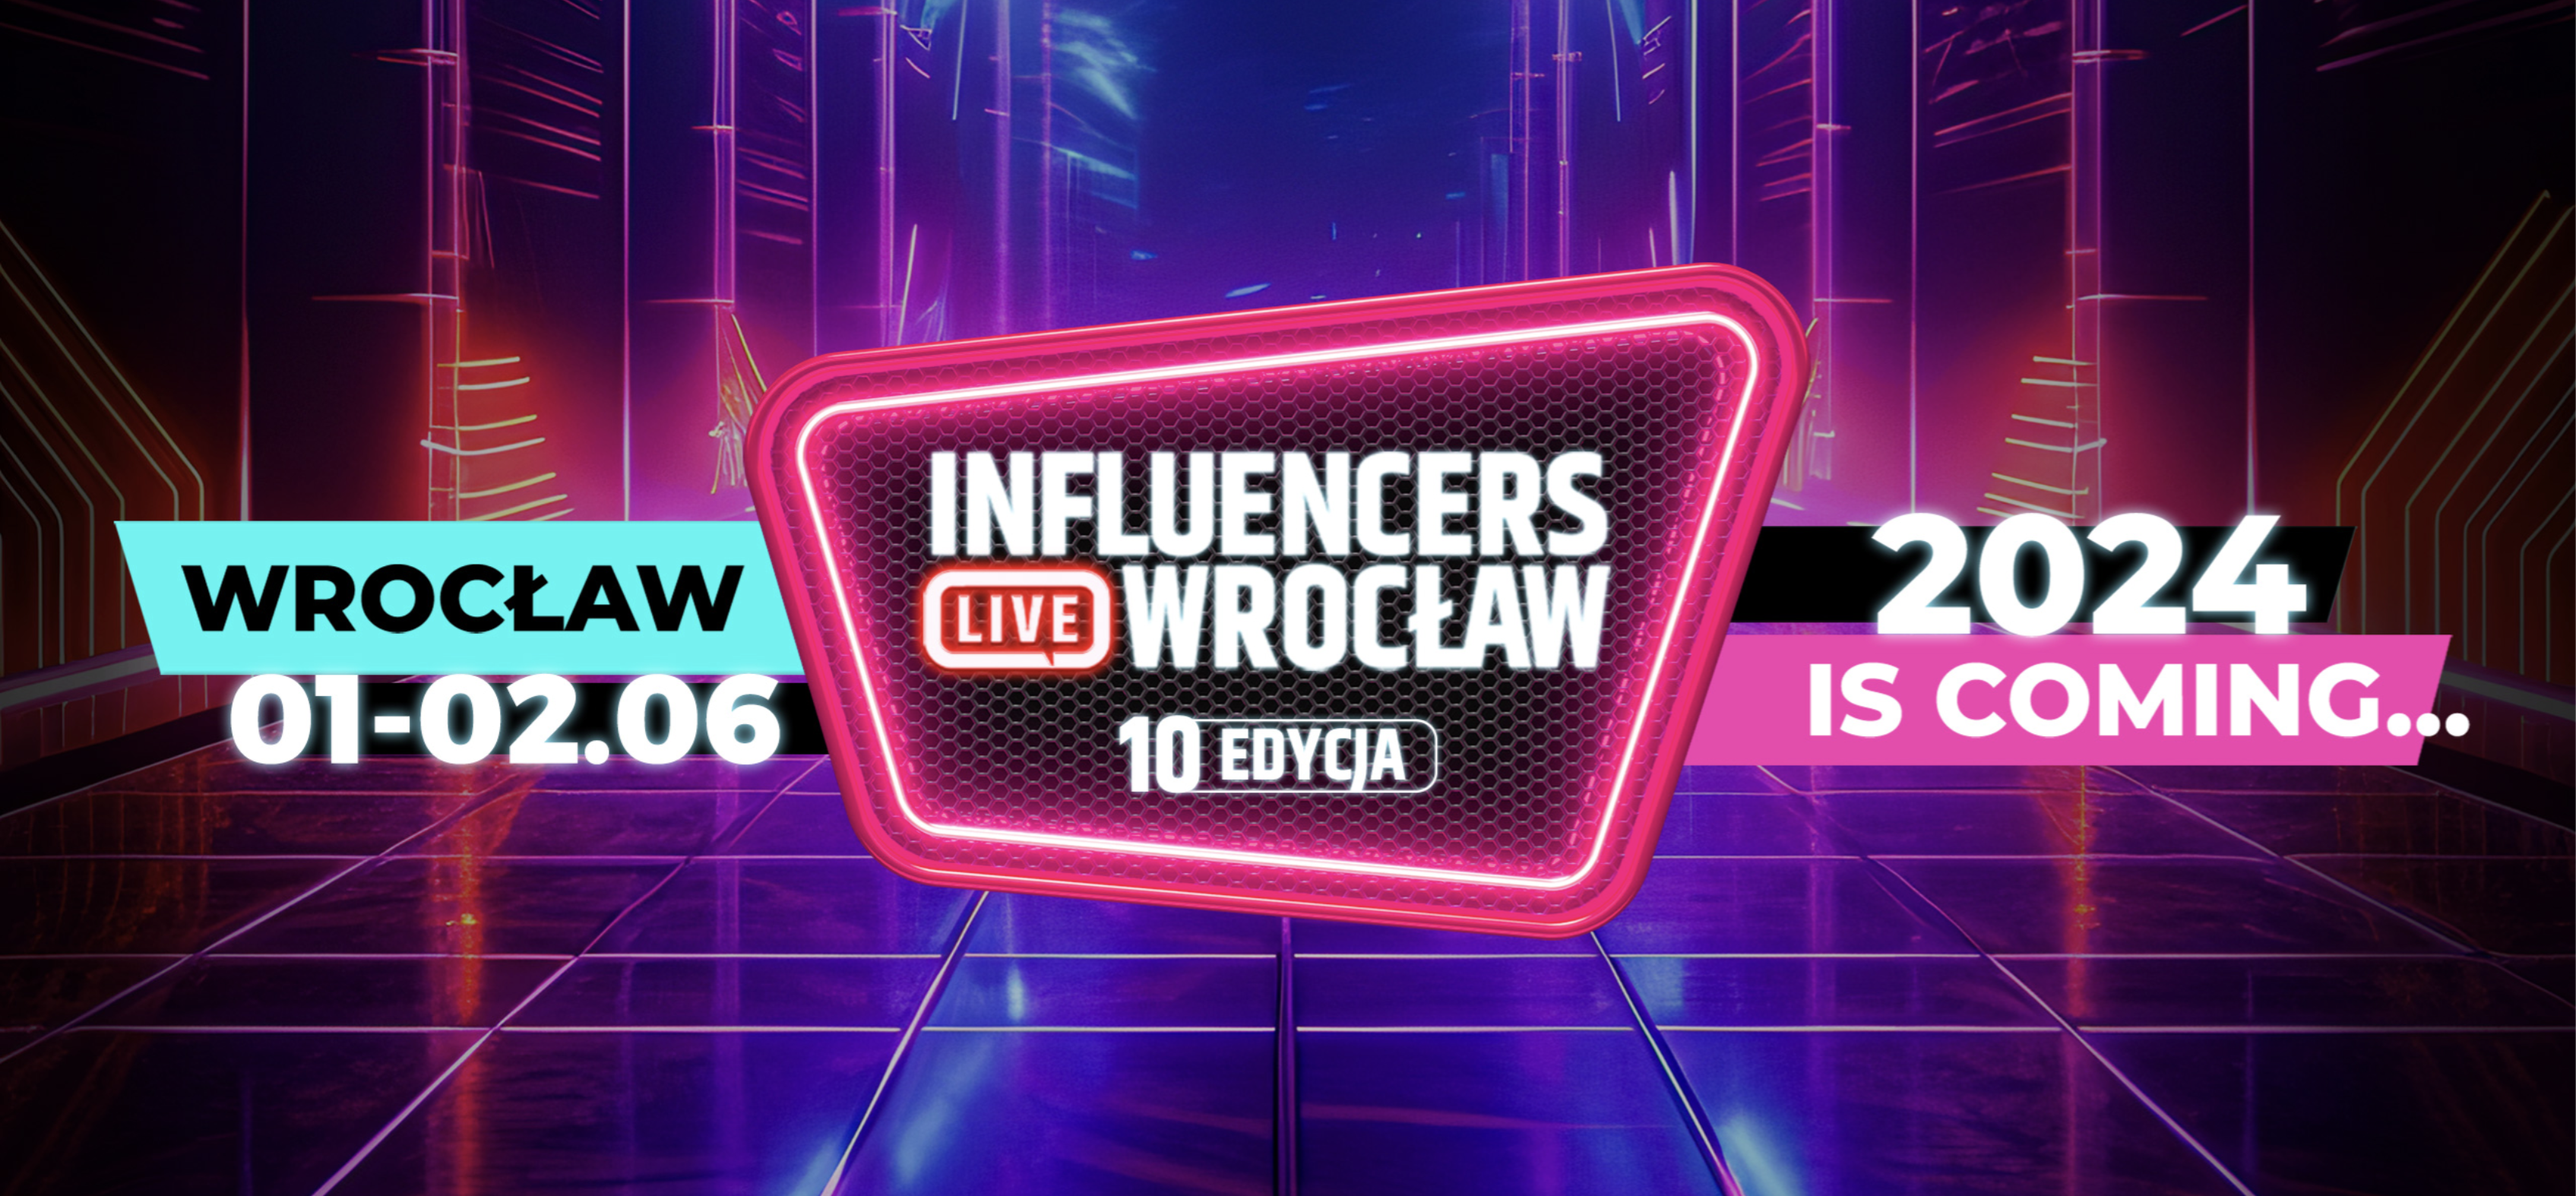 influencers-live-wroclaw-2024